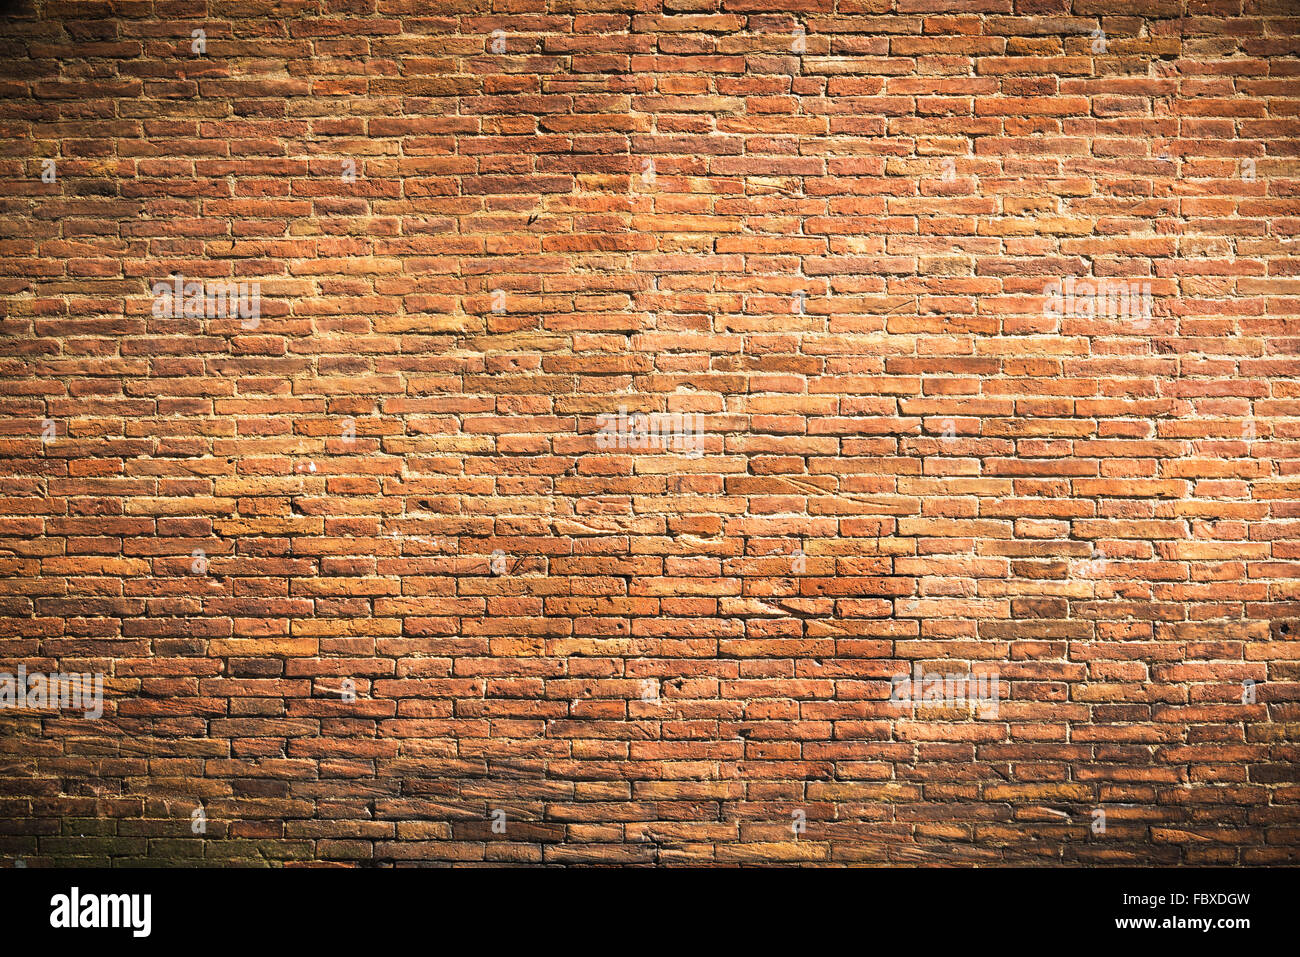 Coaldale Block street pavers line a walkway at Spring Hill College, Aug.  22, 2020, in Mobile, Alabama. The red clay bricks were made by Coaldale  Brick Stock Photo - Alamy